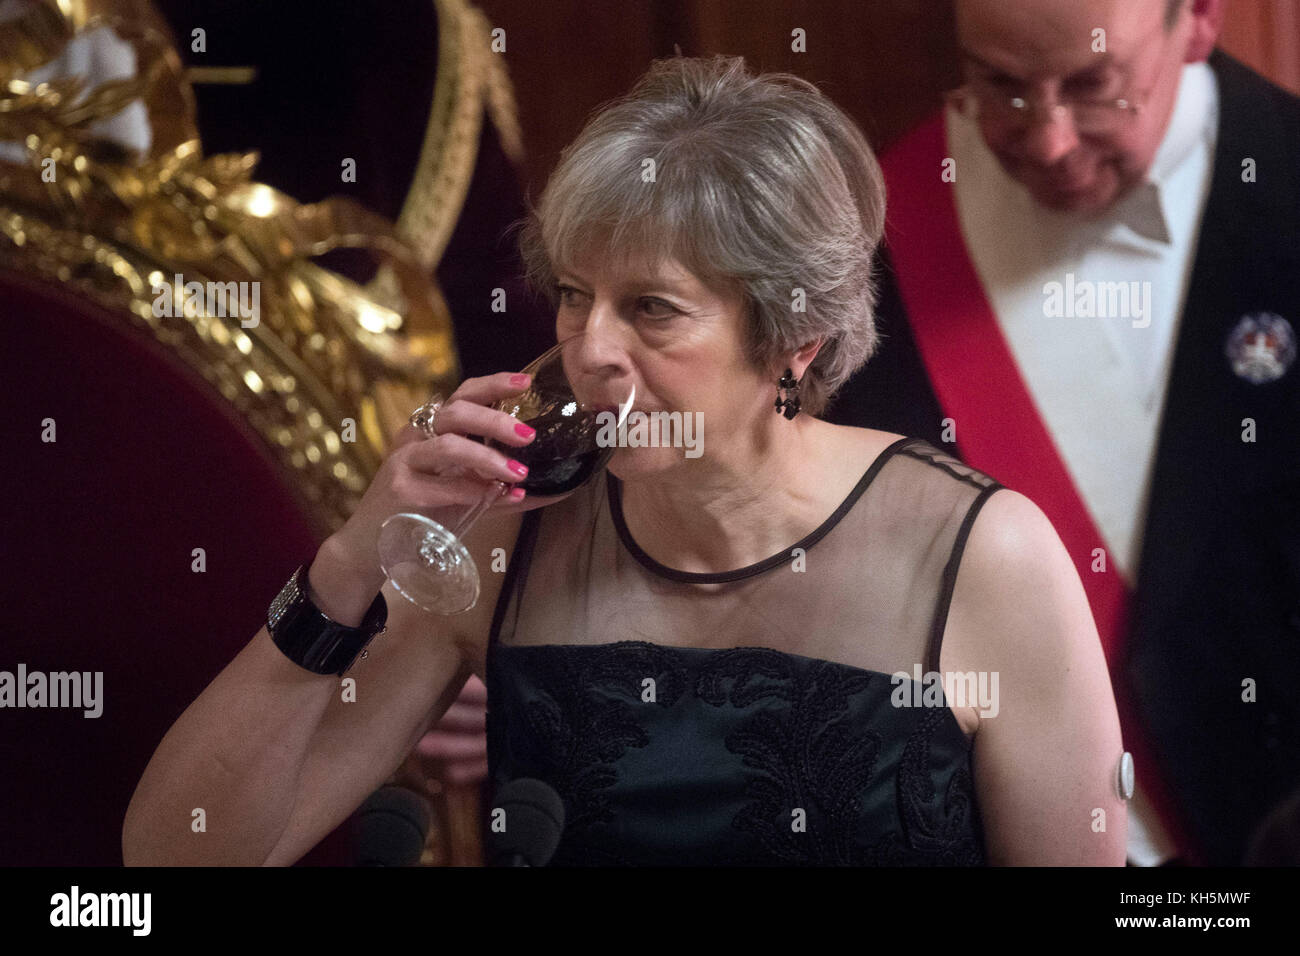 Prime Minister Theresa May after she addressed the annual Lord Mayor's Banquet at the Guildhall in London. Stock Photo